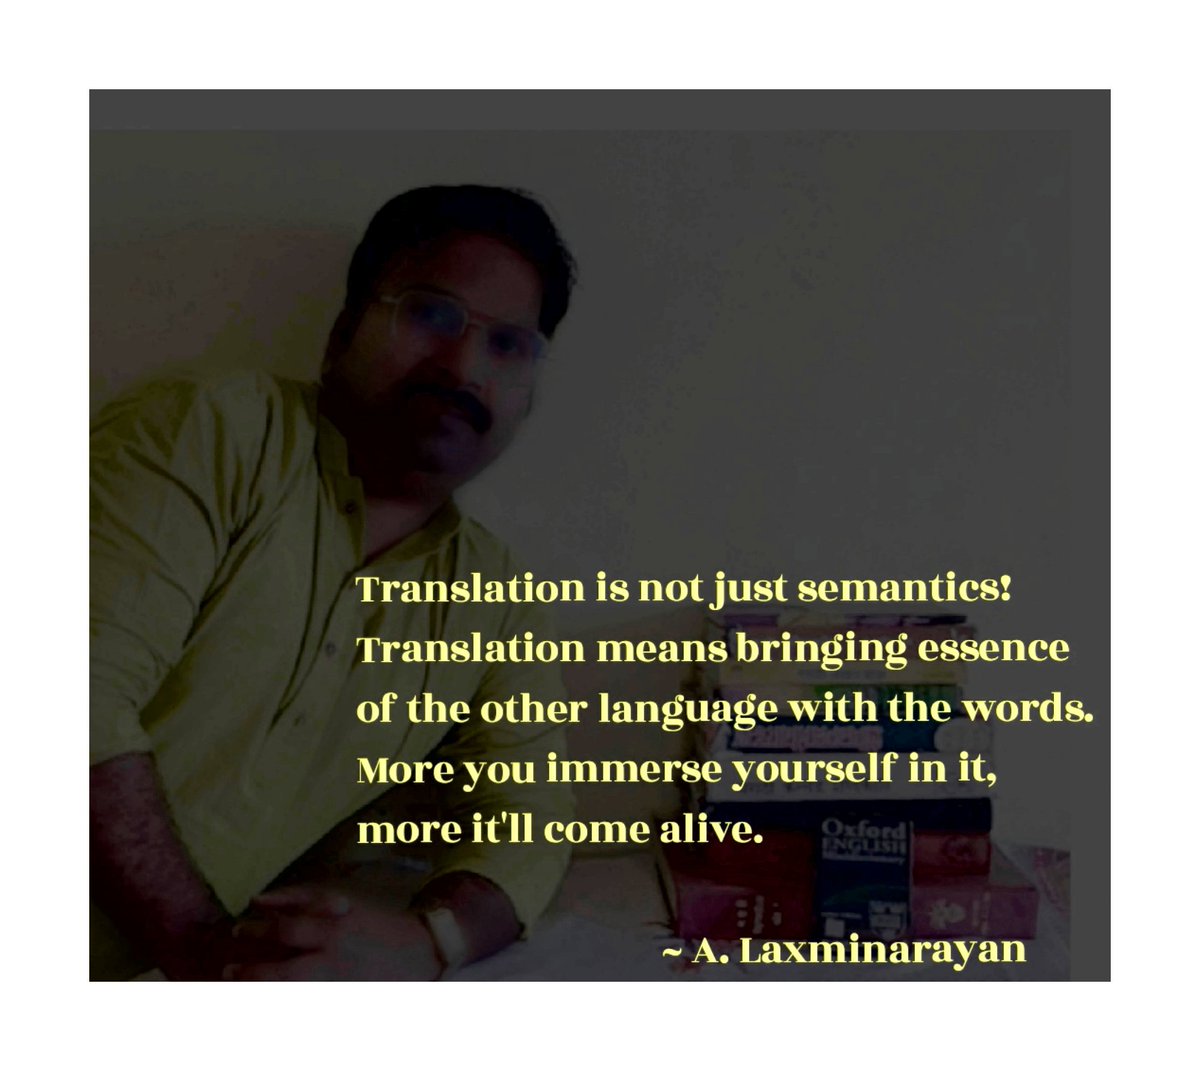 Translation is not semantics! Translation means bringing essence of the other language with the words. More you immerse yourself in it, more it'll come alive. 

~ A. Laxminarayan 
#translationwork #translator #transcreation #translatingservices
#essenceoflanguage #contentcreator